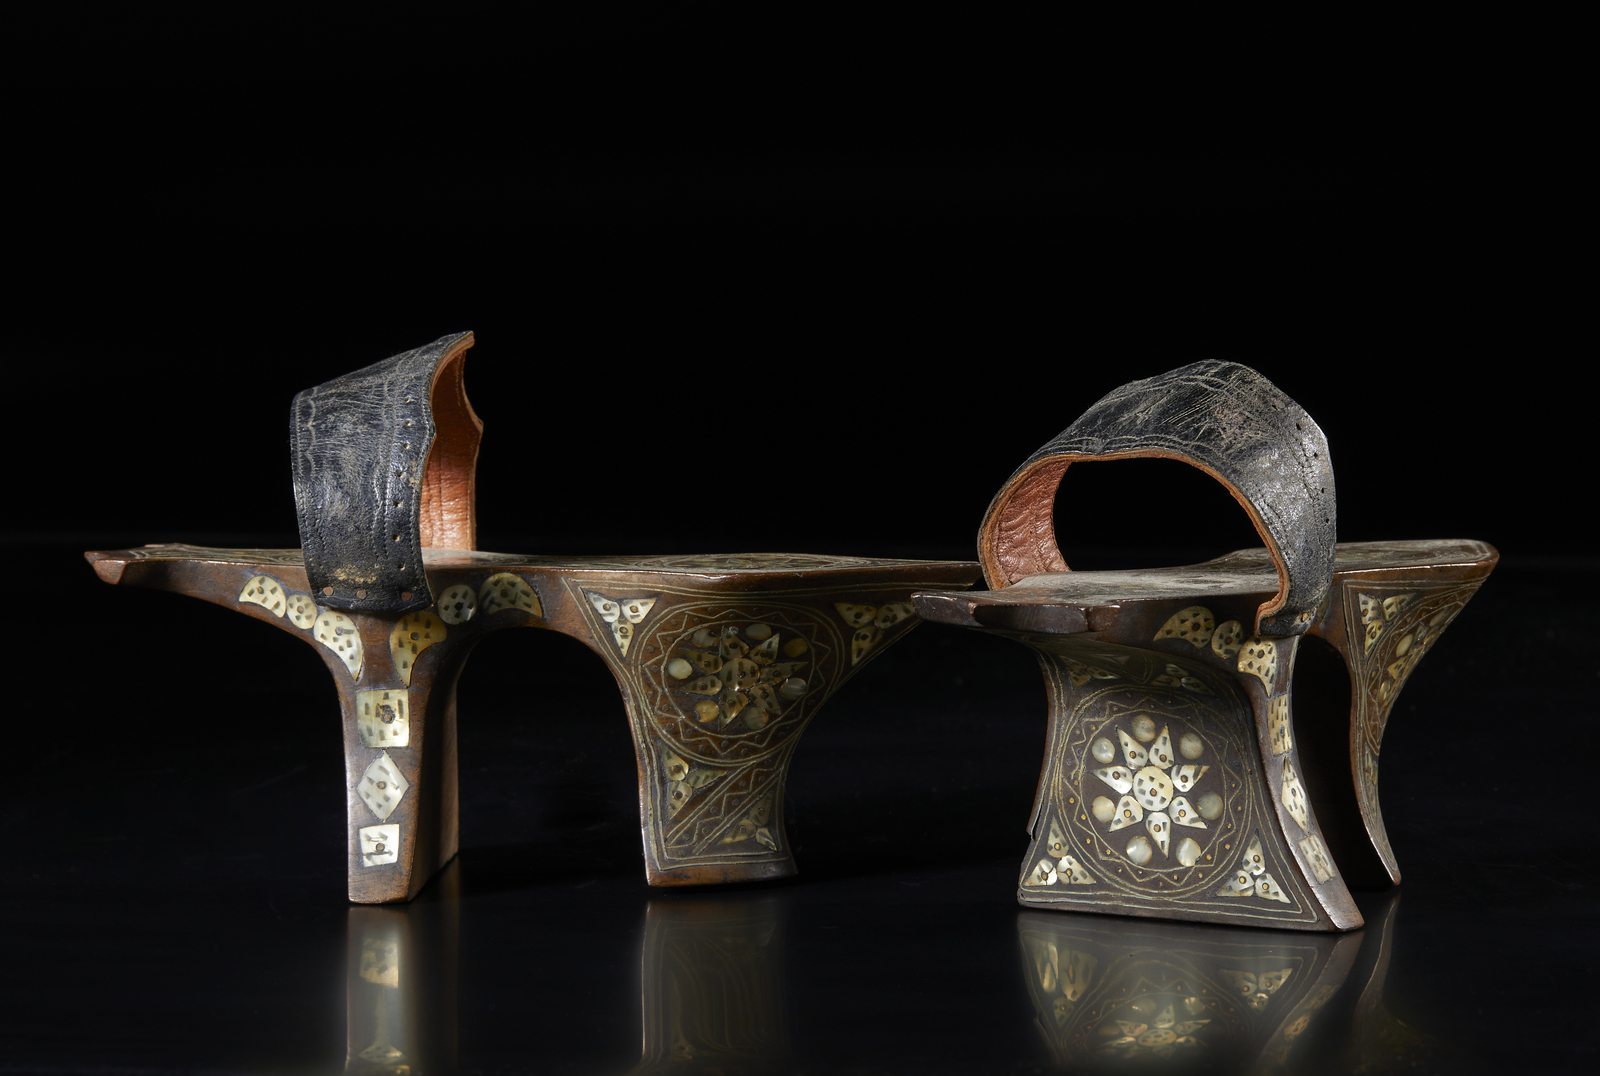 Arte Islamica A pair of mother-of-pearl inlaid wooden hammam clogs Ottoman Turkey, 19th century . - Image 4 of 4